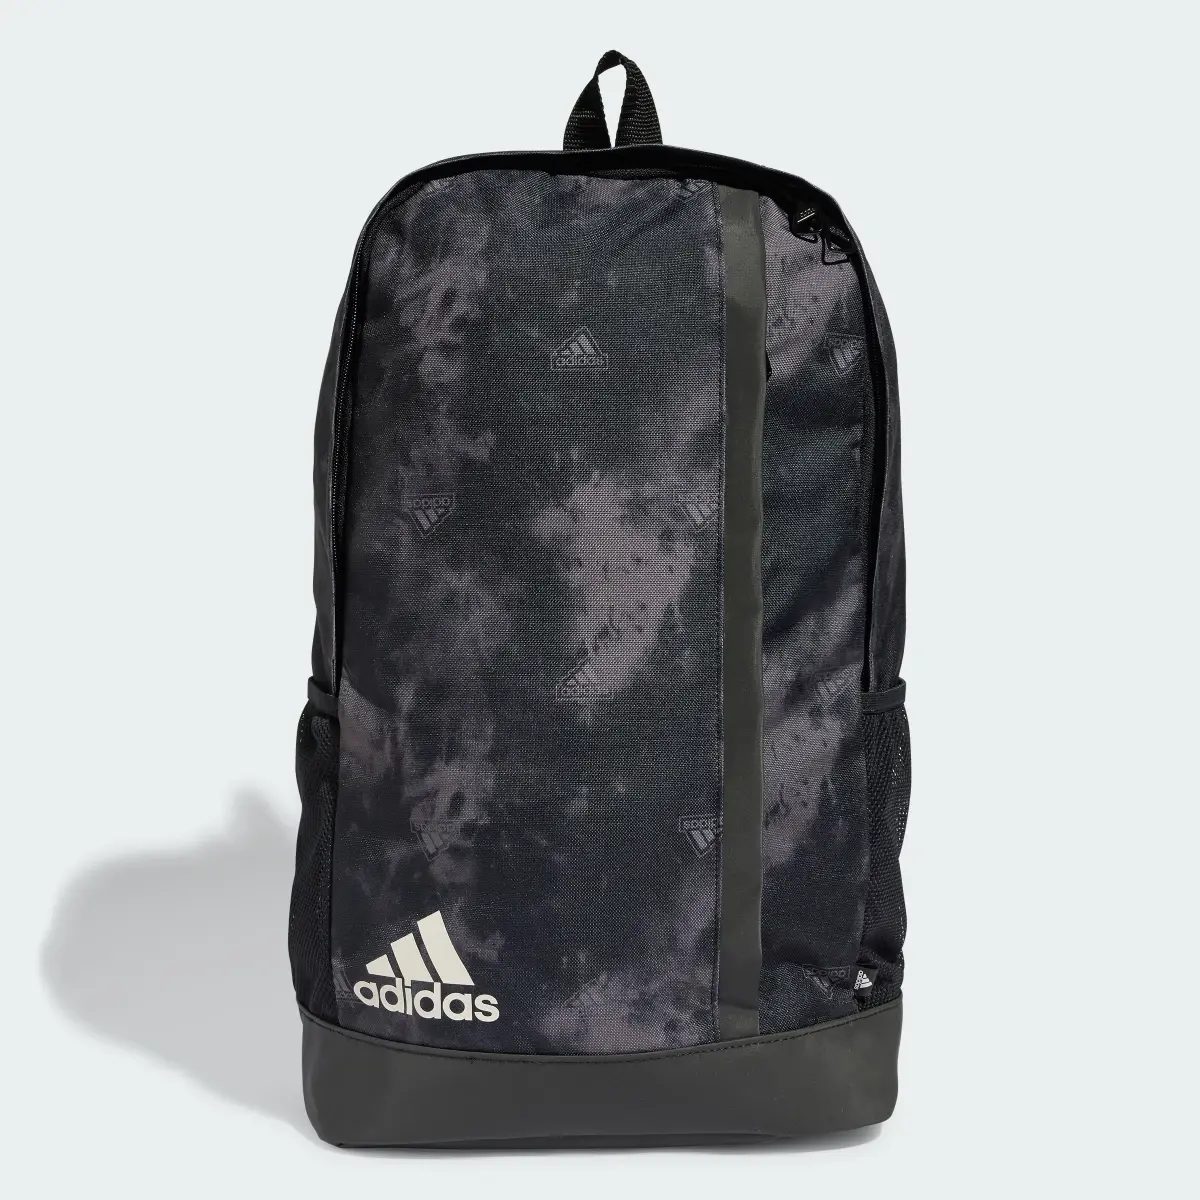 Adidas Linear Graphic Backpack. 1